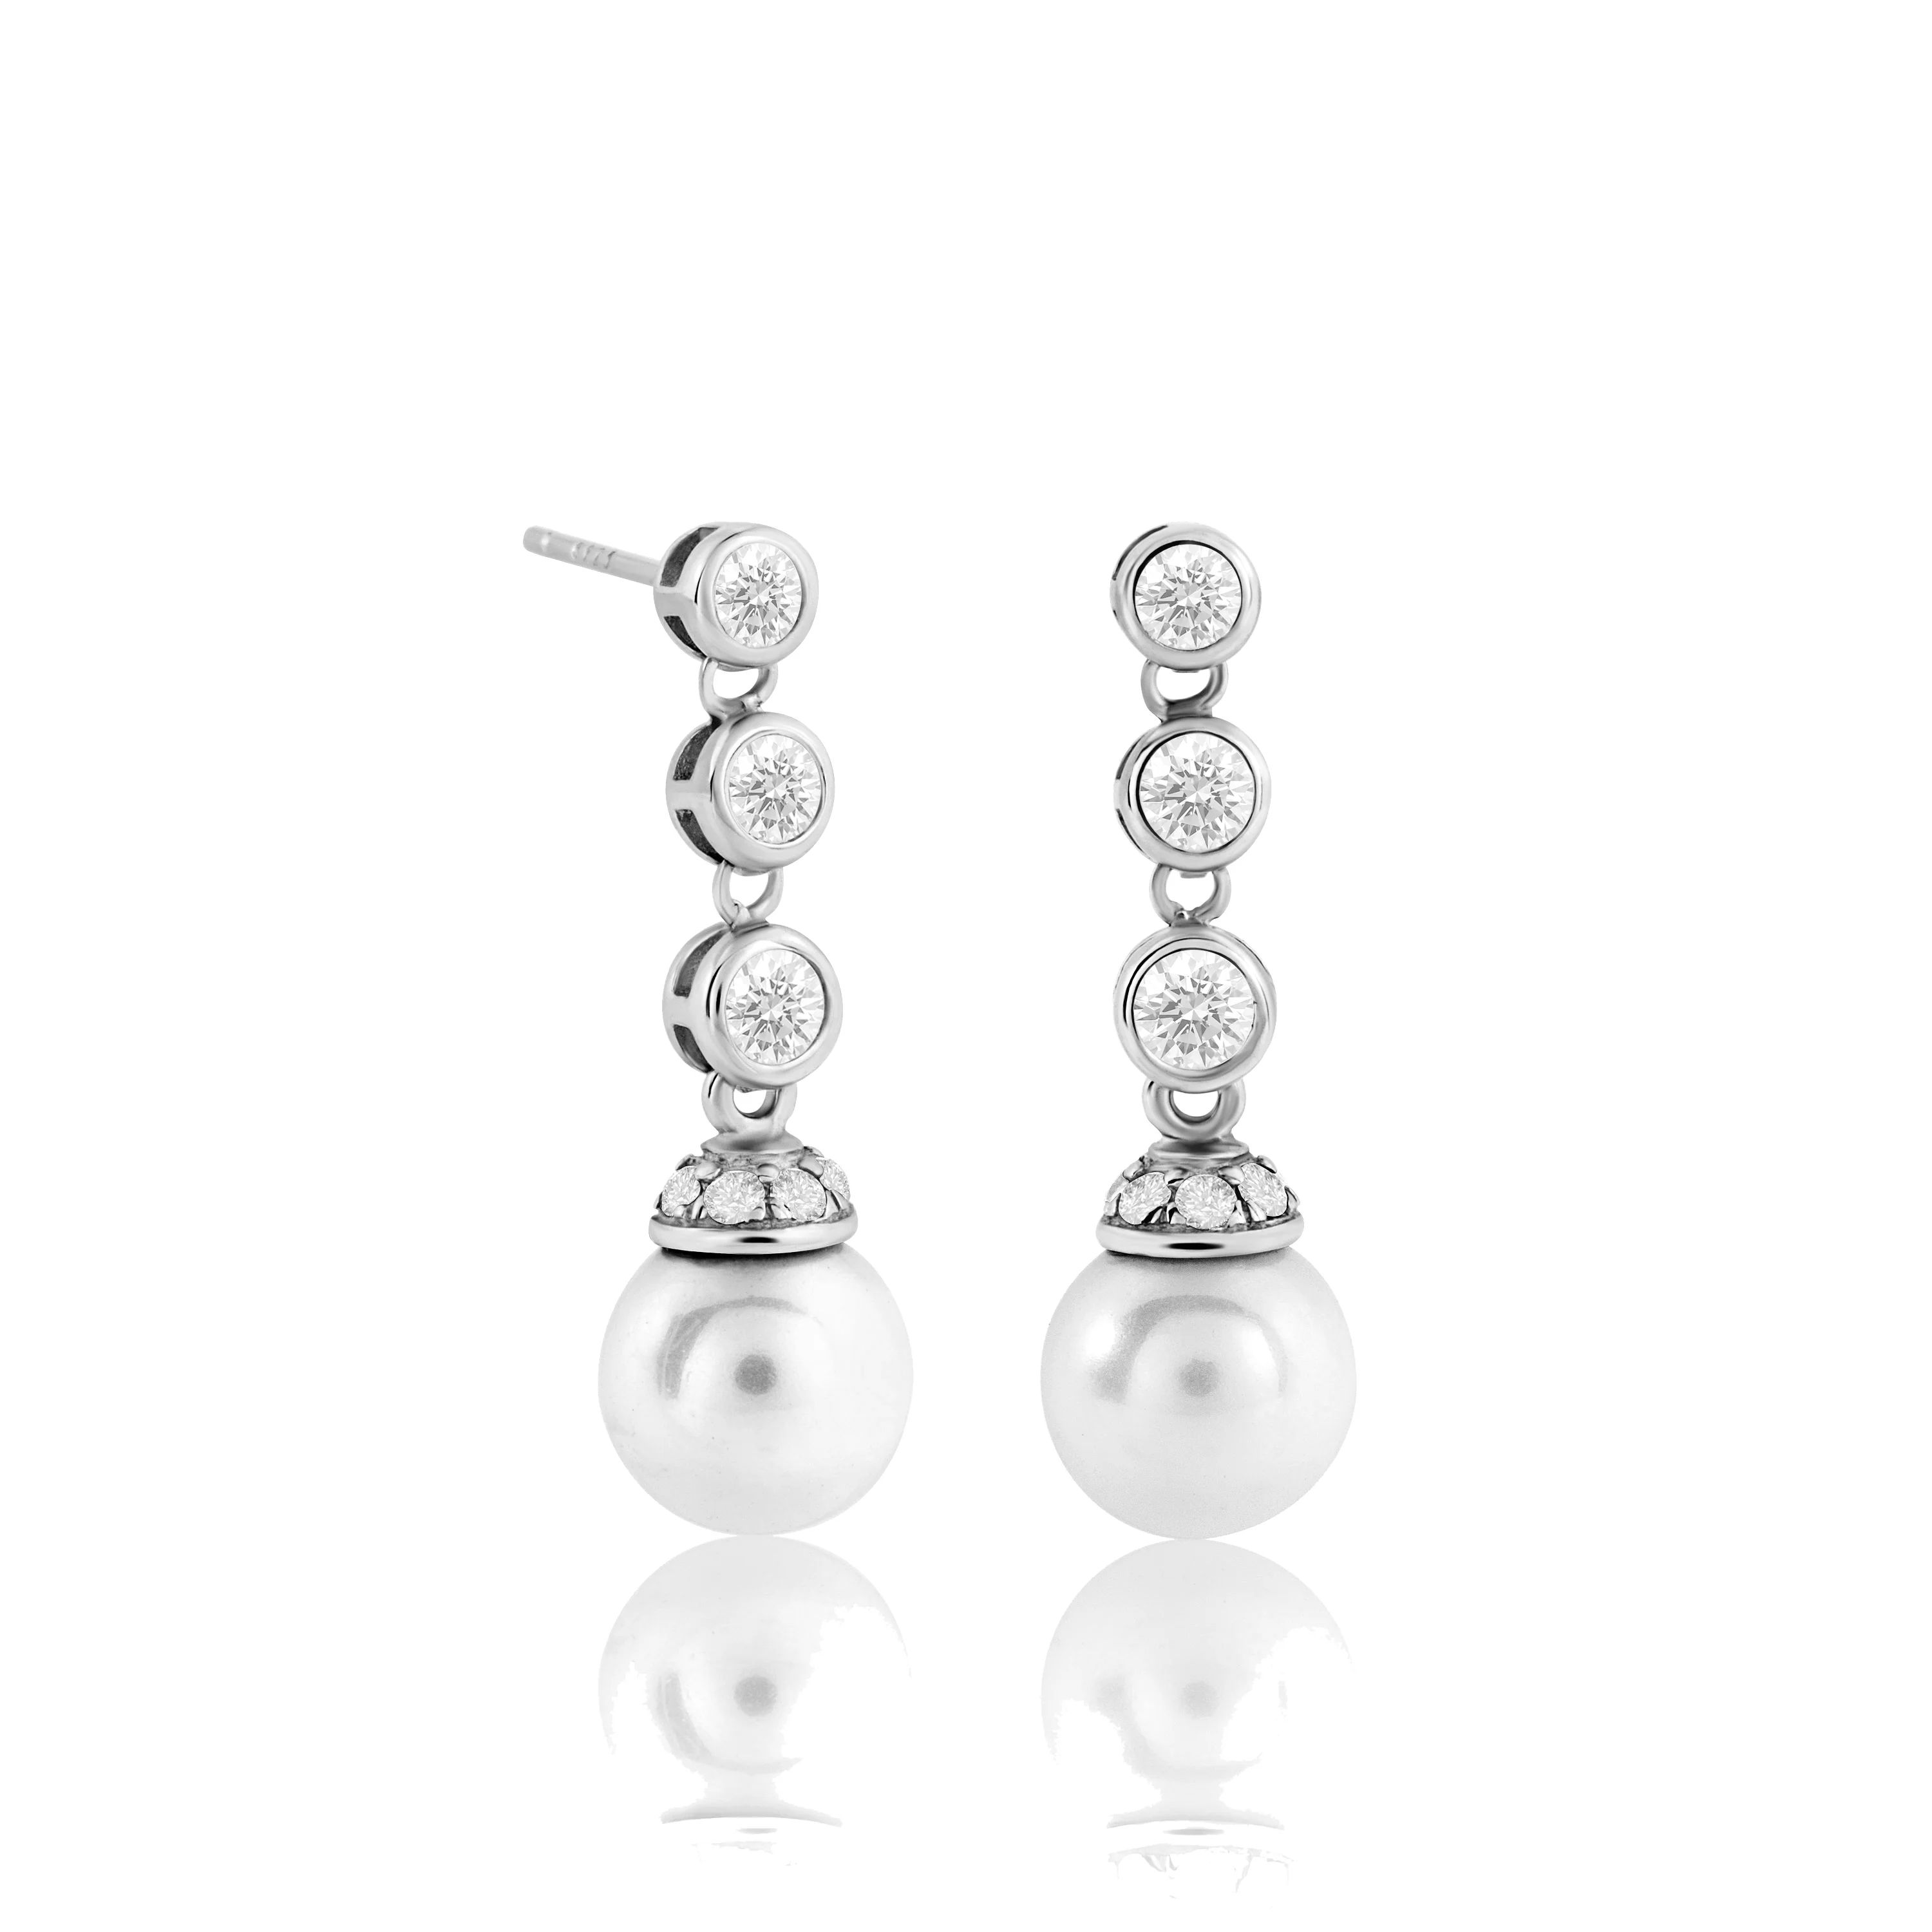 The Pearl and ‘Diamond’ Earrings - PRE ORDER FOR DELIVERY BY END OF JULY | Heavenly London